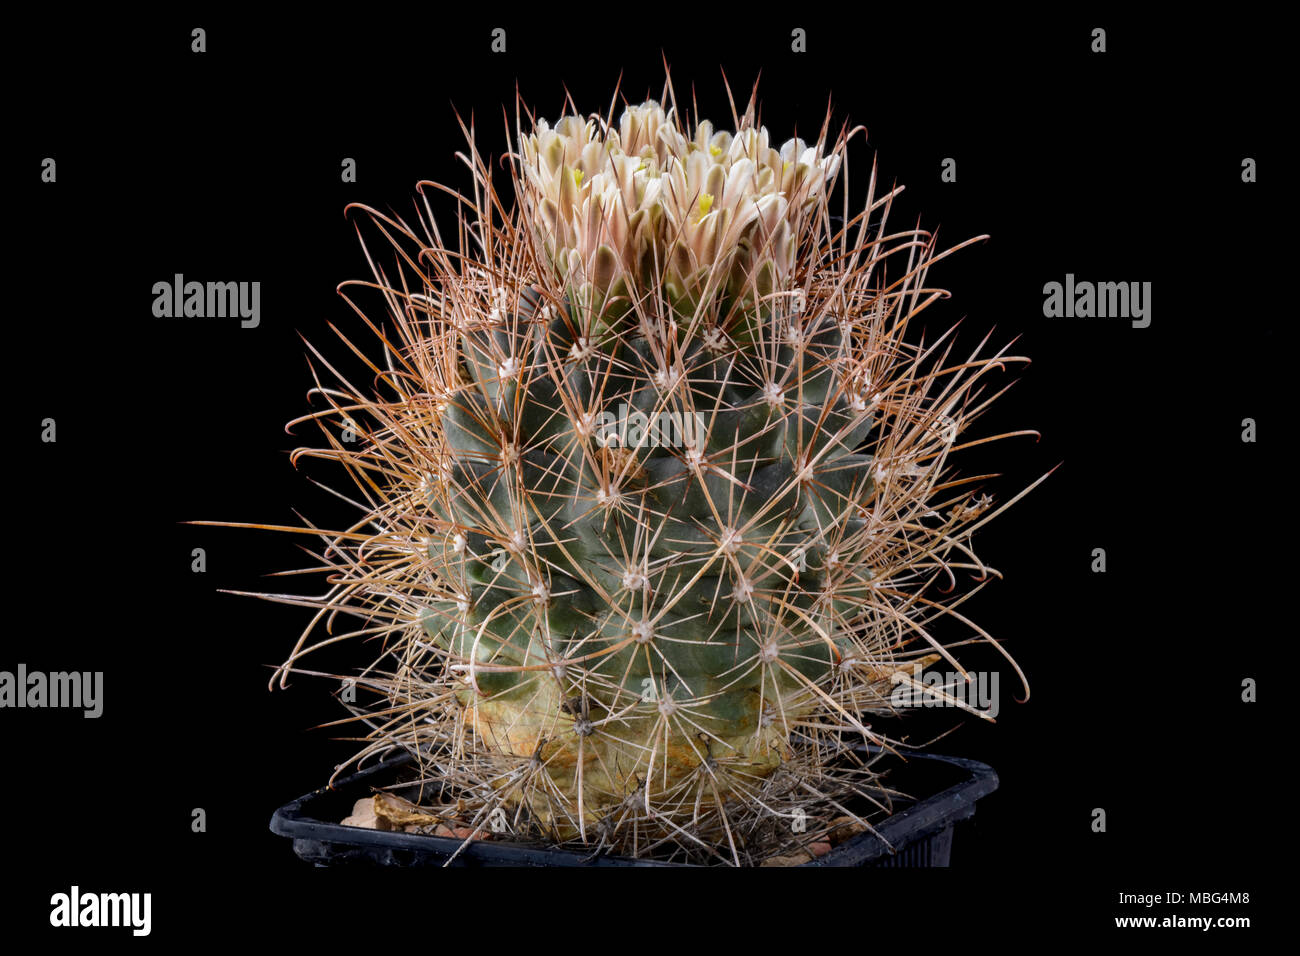 Cactus Ancistrocactus brevihamatus with flowers isolated on black Stock Photo